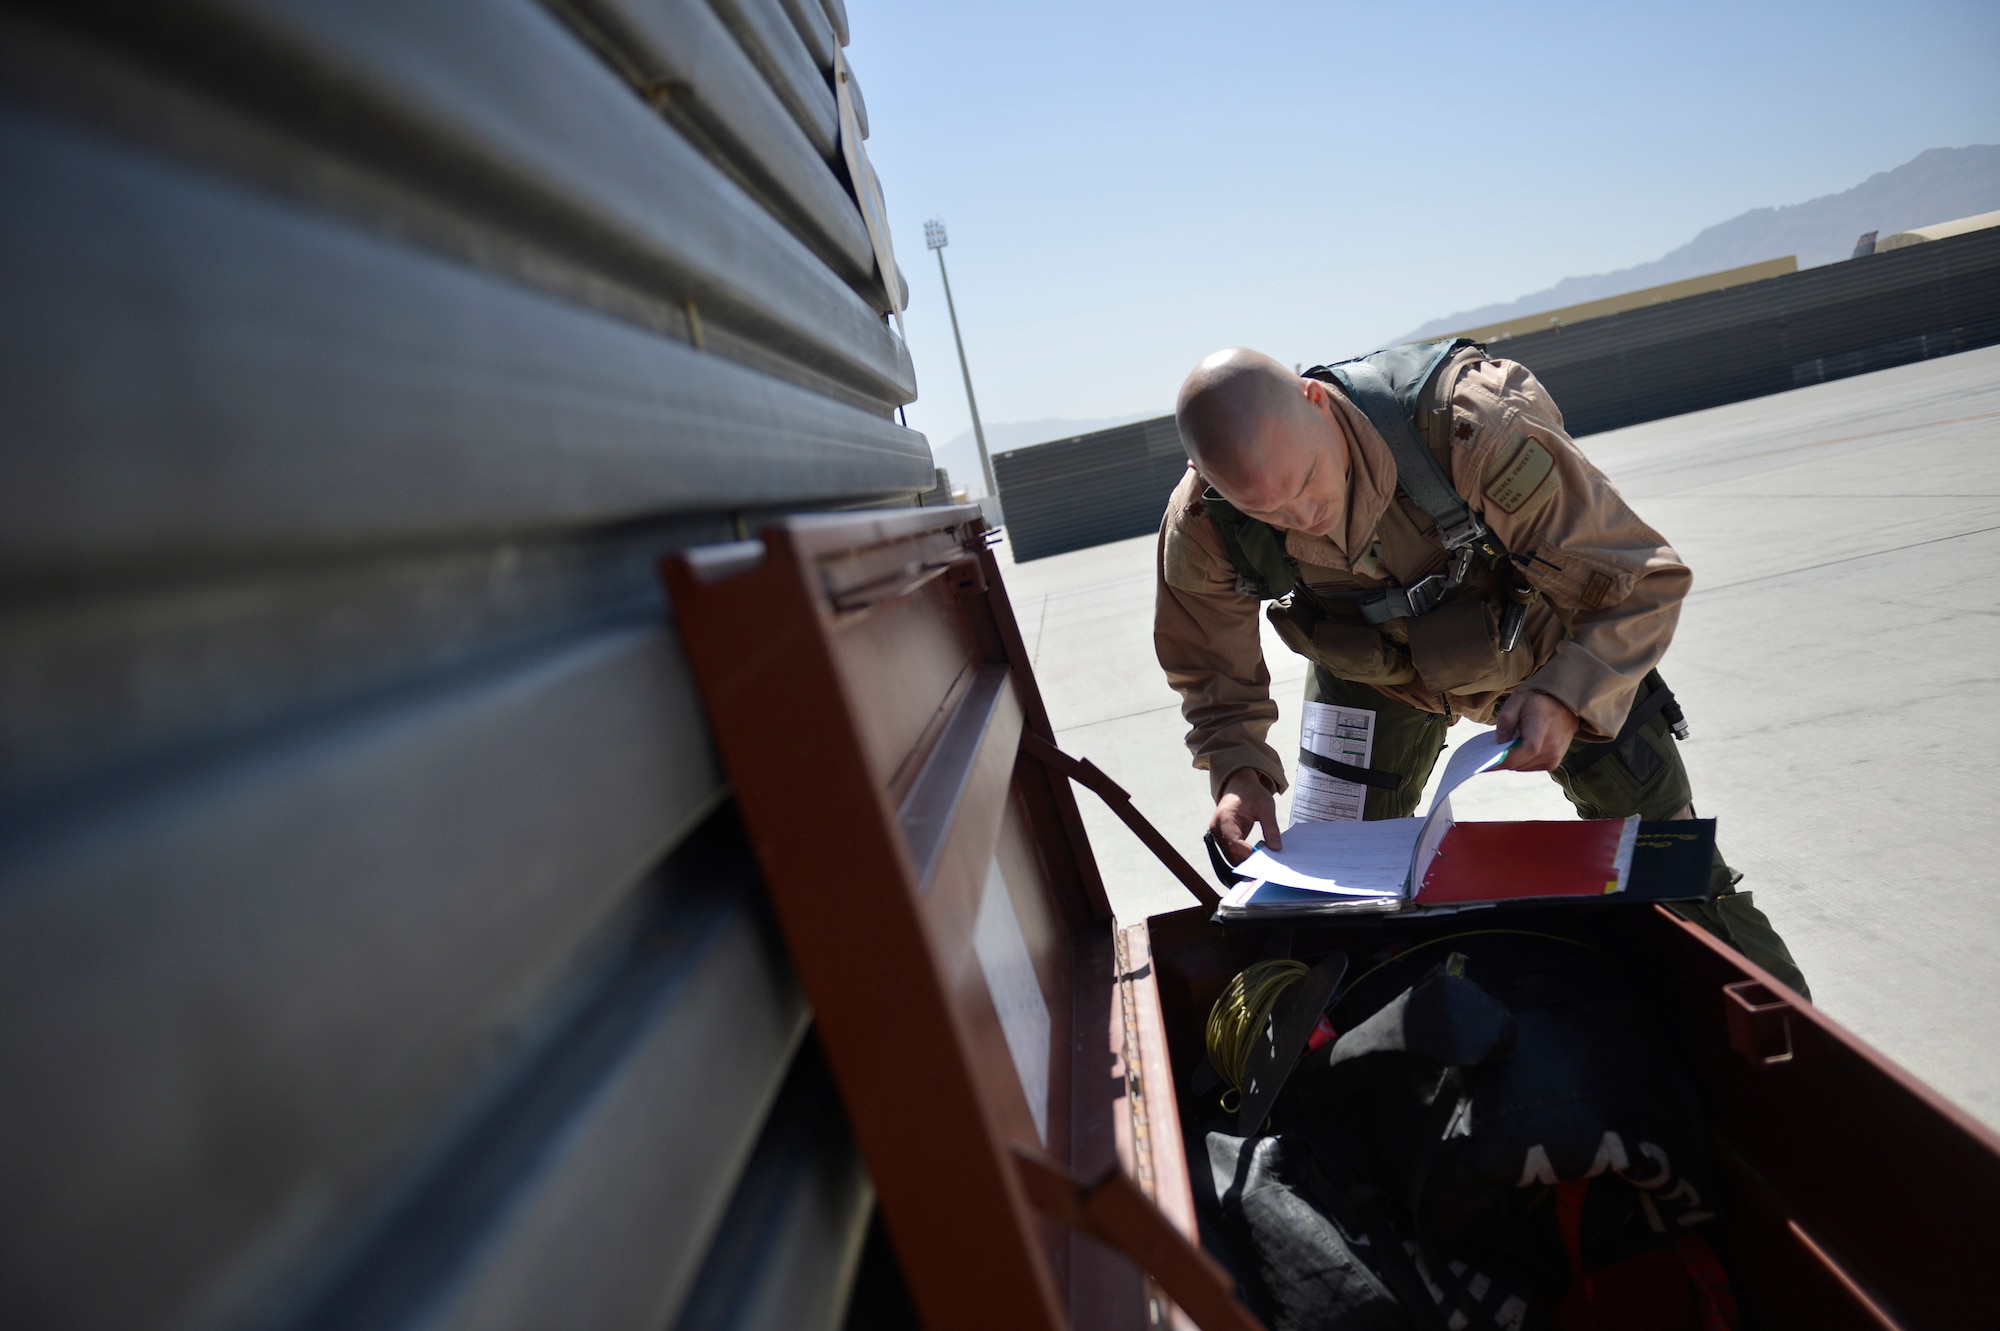 U.S. Air Force Maj. Vincent Sherer, 455th Ai r Expeditionary Wing, A-10 Thunderbolt II pilot, reviews a checklist before a sortie at Bagram Airfield, Afghanistan Aug. 5, 2014.  Sherer has been flying for 12 years and has deployed to Bagram four times.  He is deployed from Davis-Monthan Air Force Base, Ariz. and a native of Portland, Ore. (U.S. Air Force photo by Staff Sgt. Evelyn Chavez/Released)